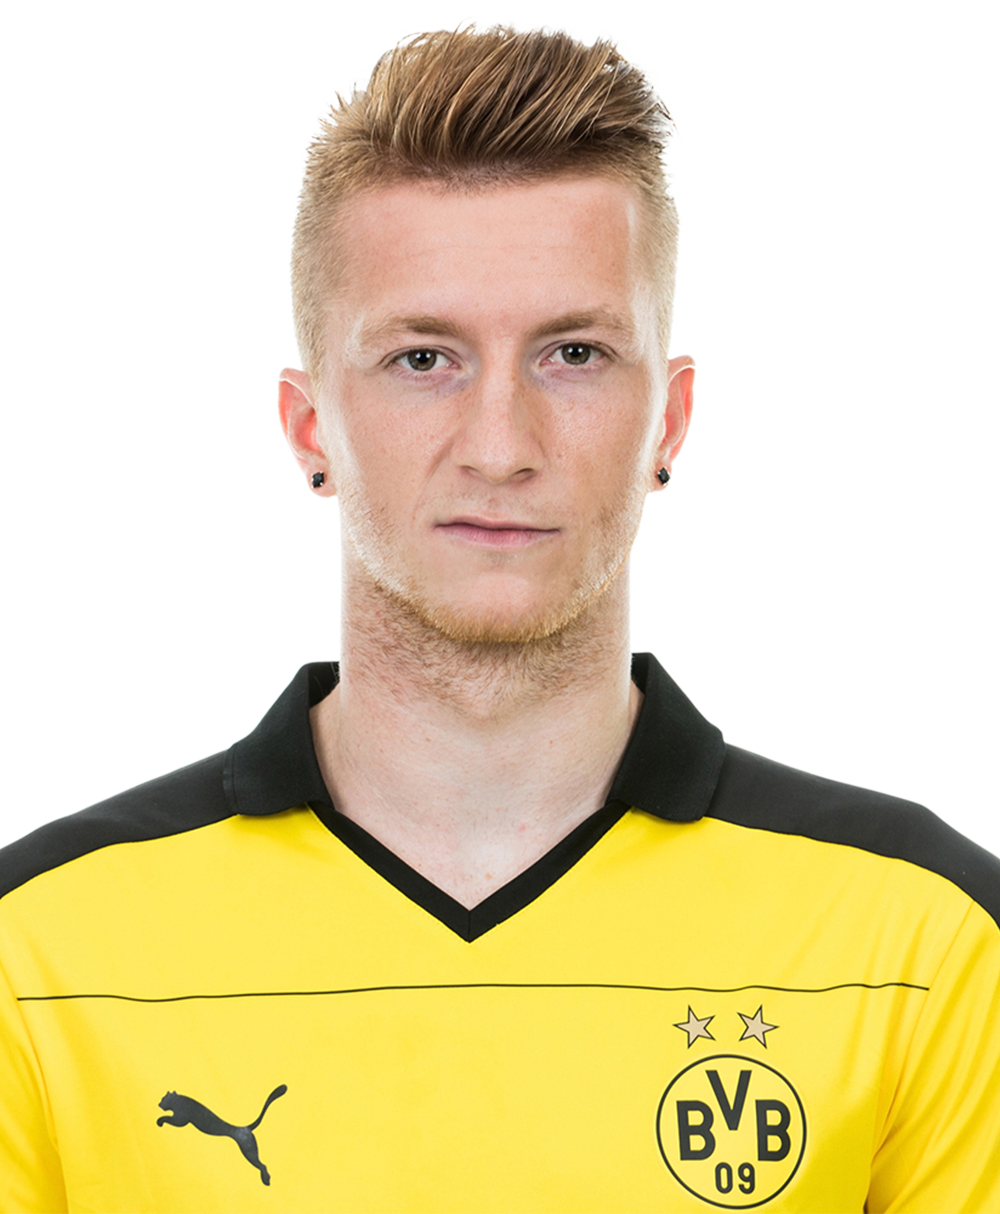 Why isn't any team buying Marco Reus? - Quora